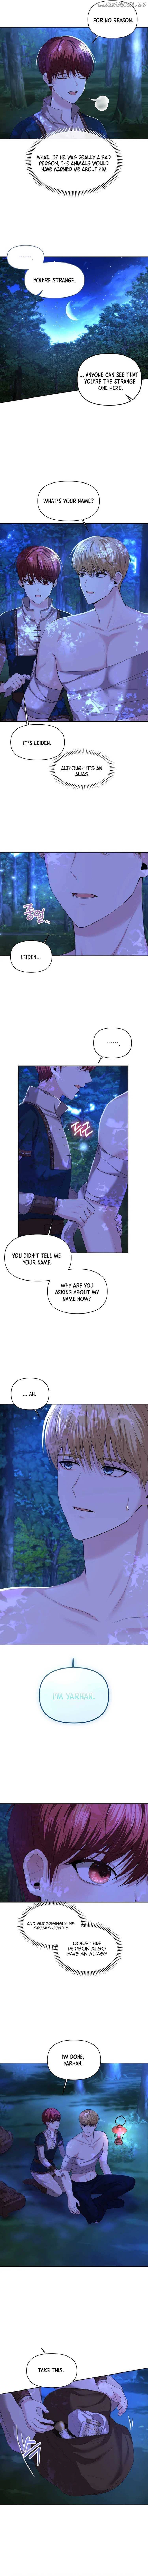 Divorce is the Condition Chapter 2 - page 6